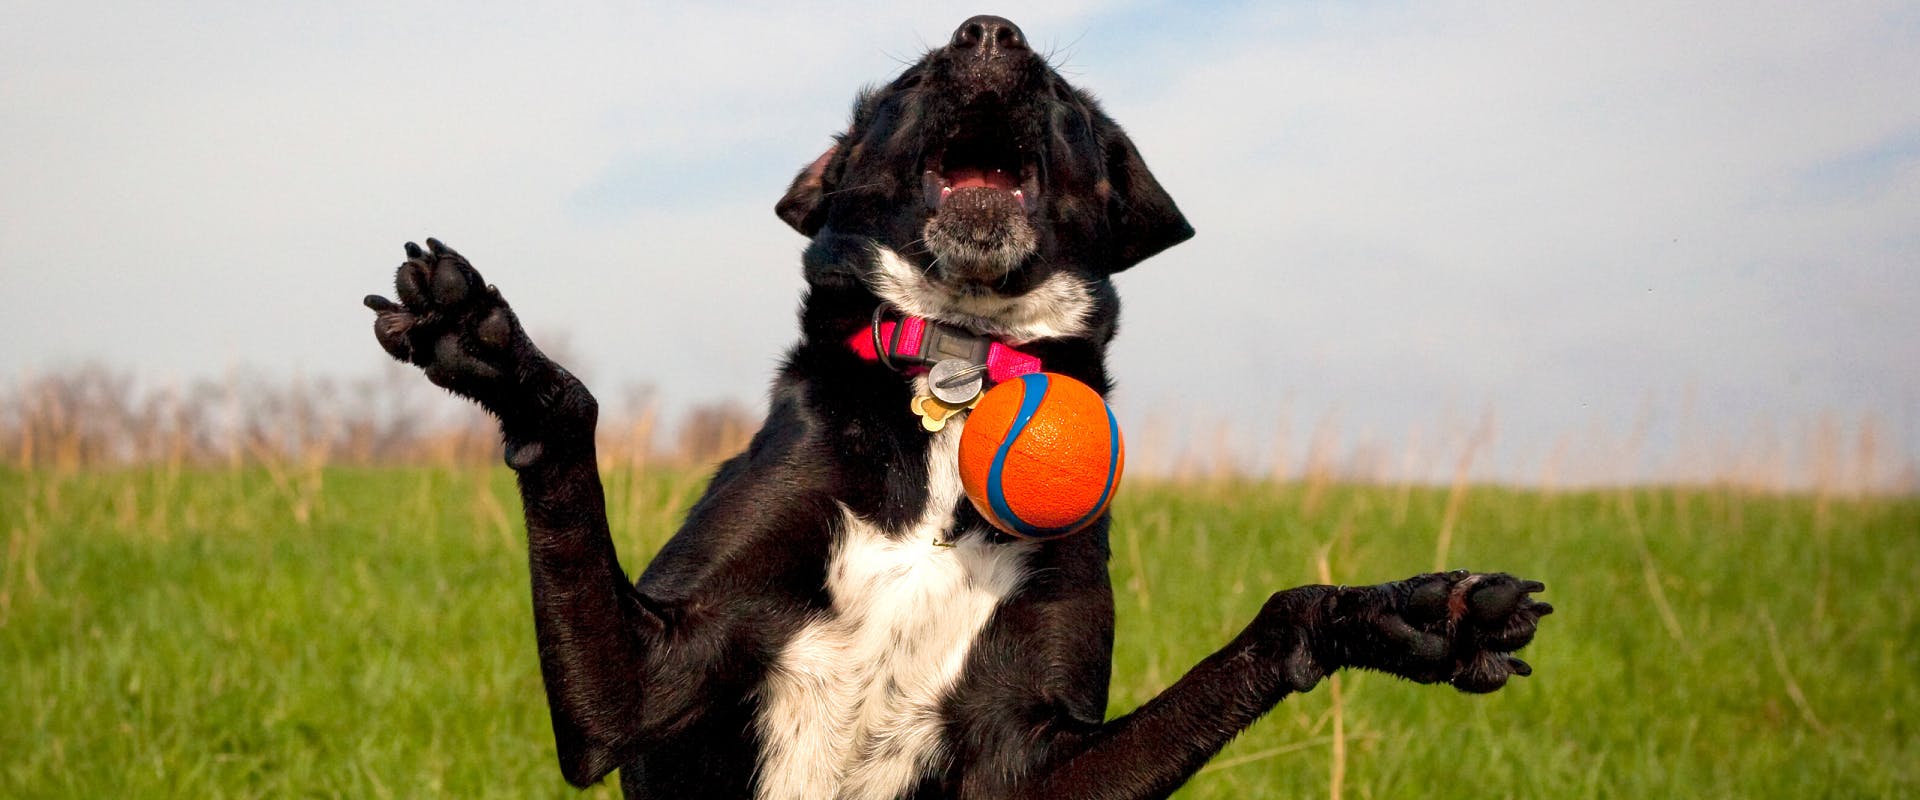 black and white dog trying to catch a ball in a field